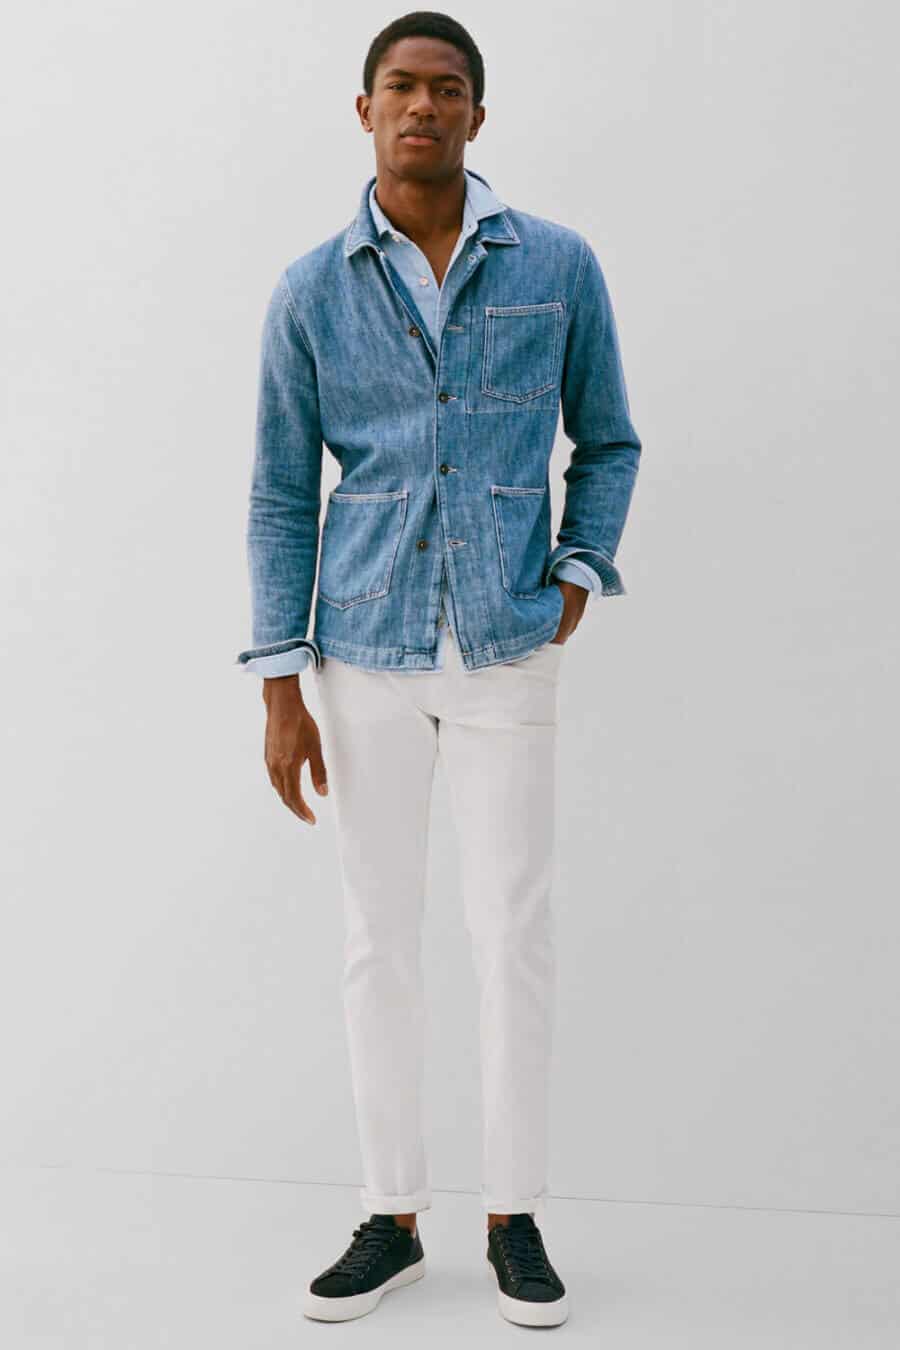 Men's double denim outfit - chore jacket and white jeans